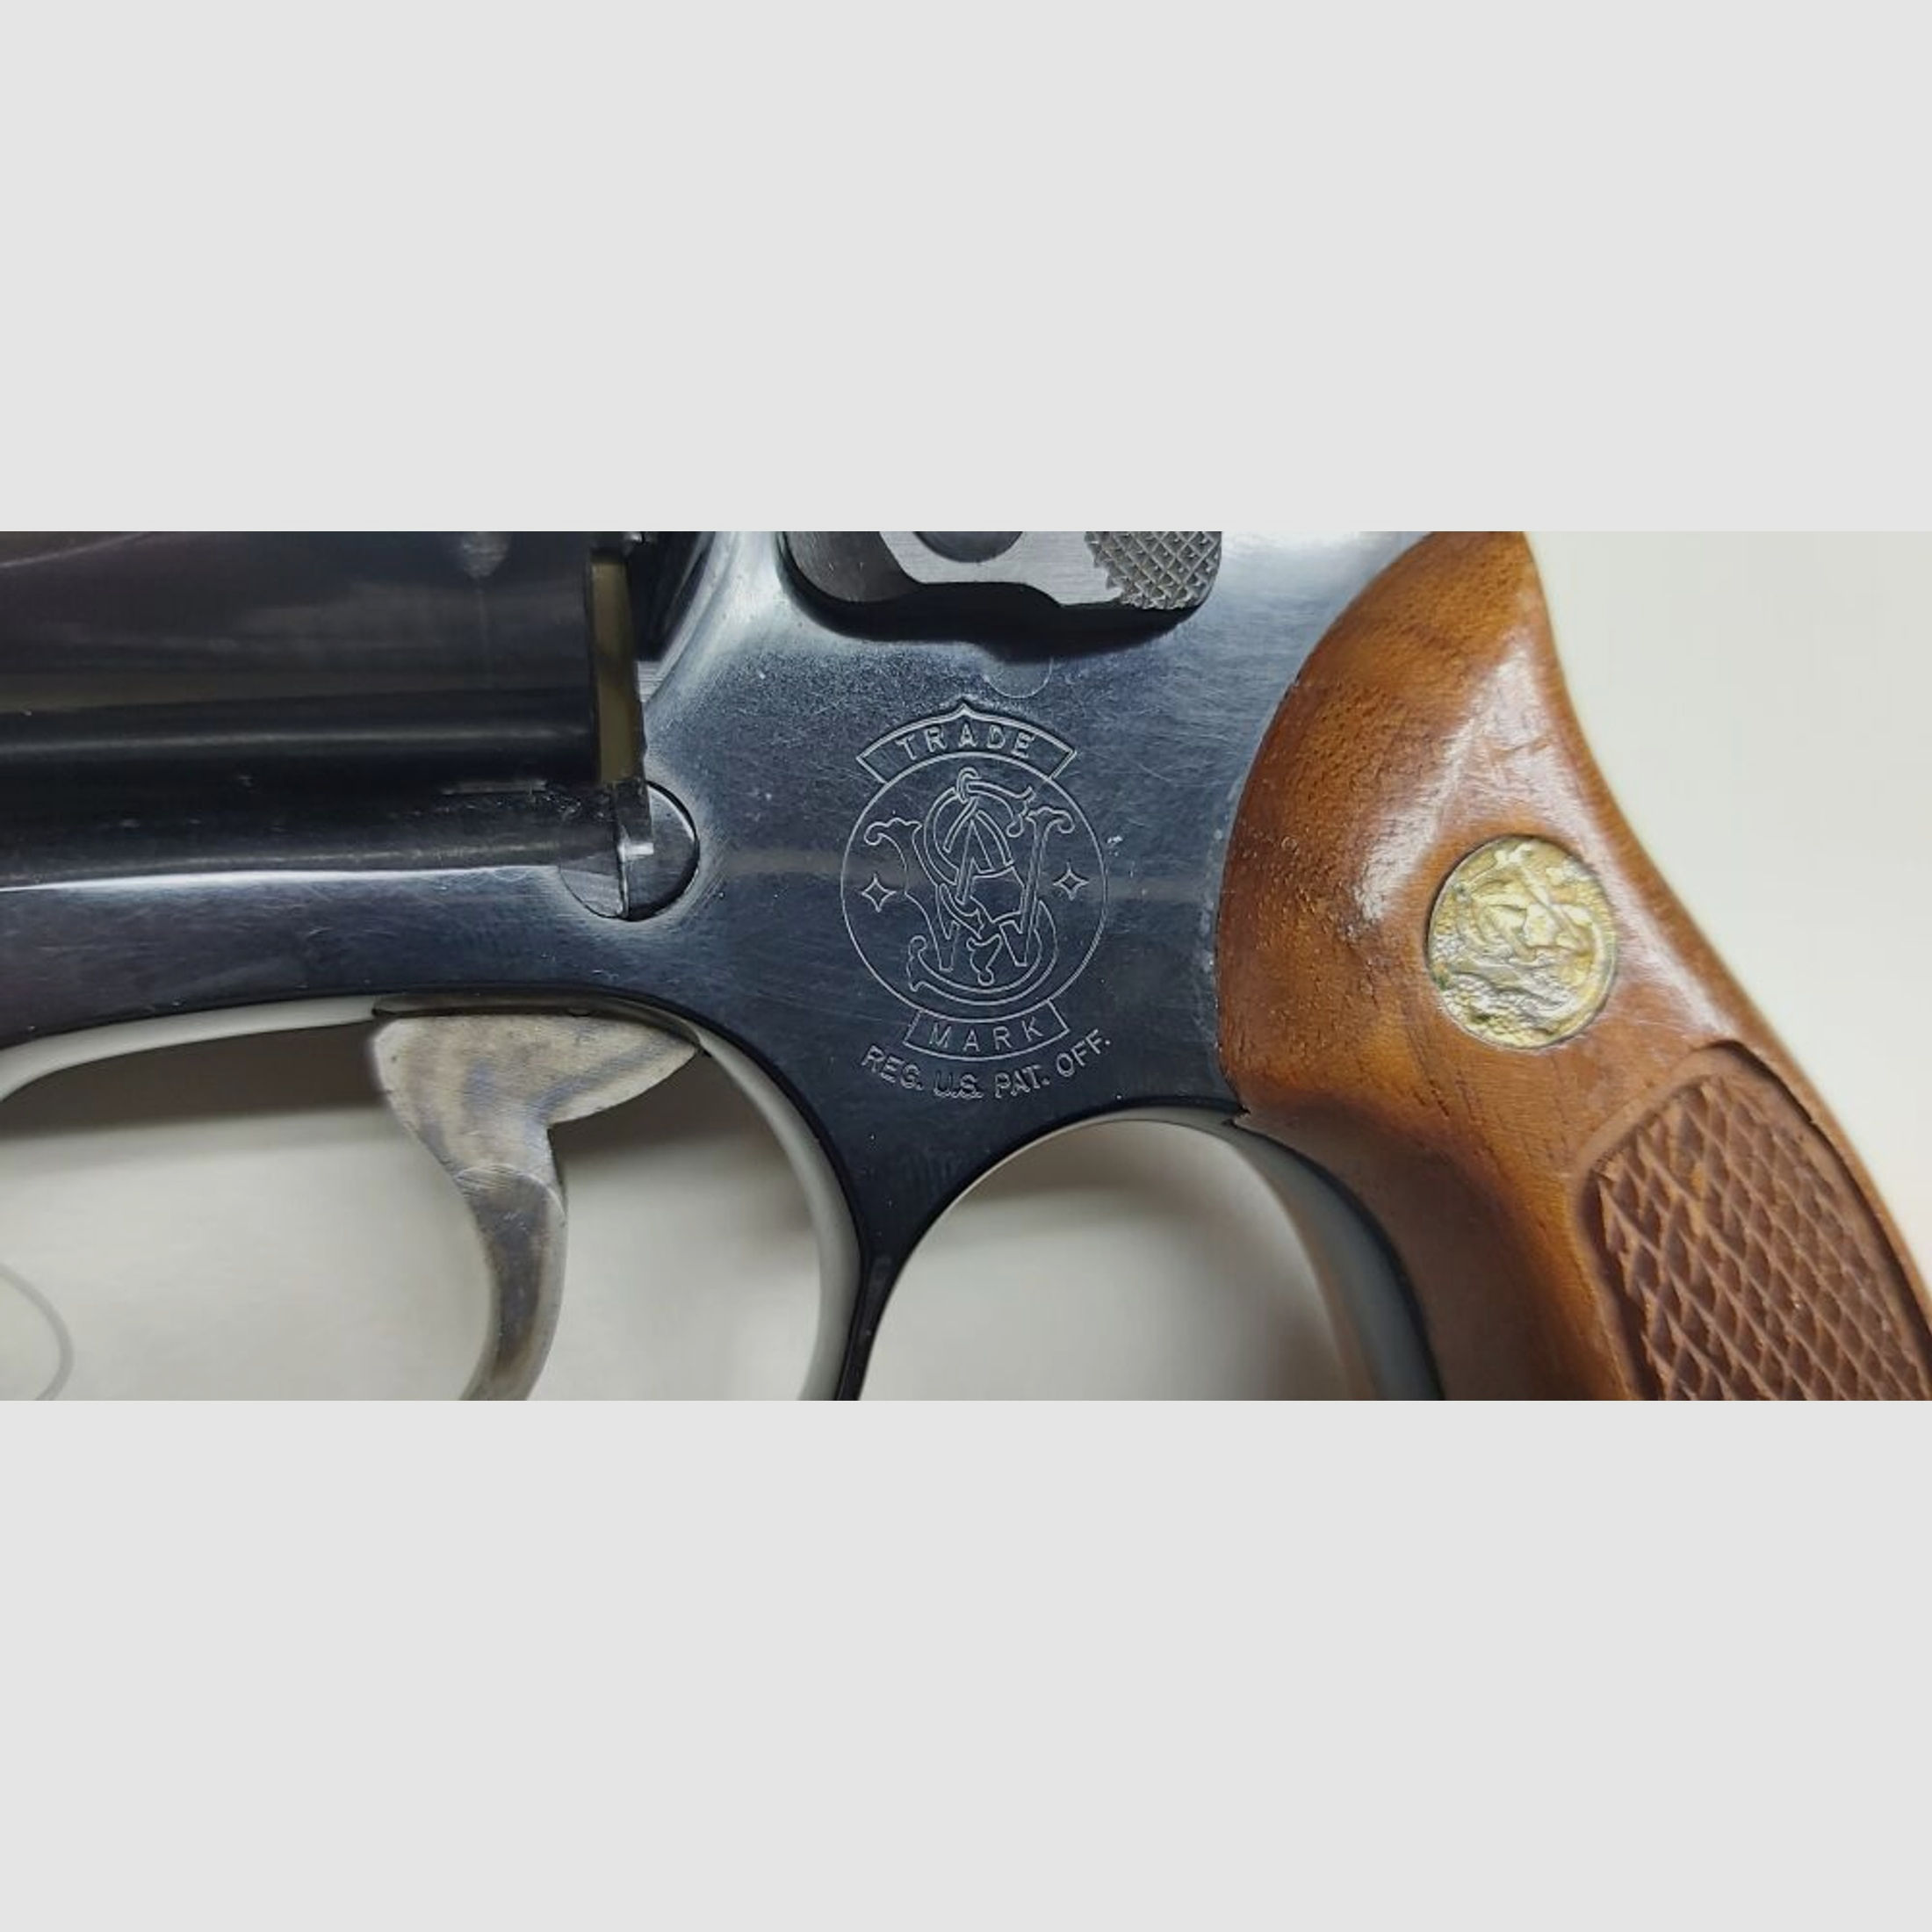 Smith & Wesson	 Mod. 37 Airweight